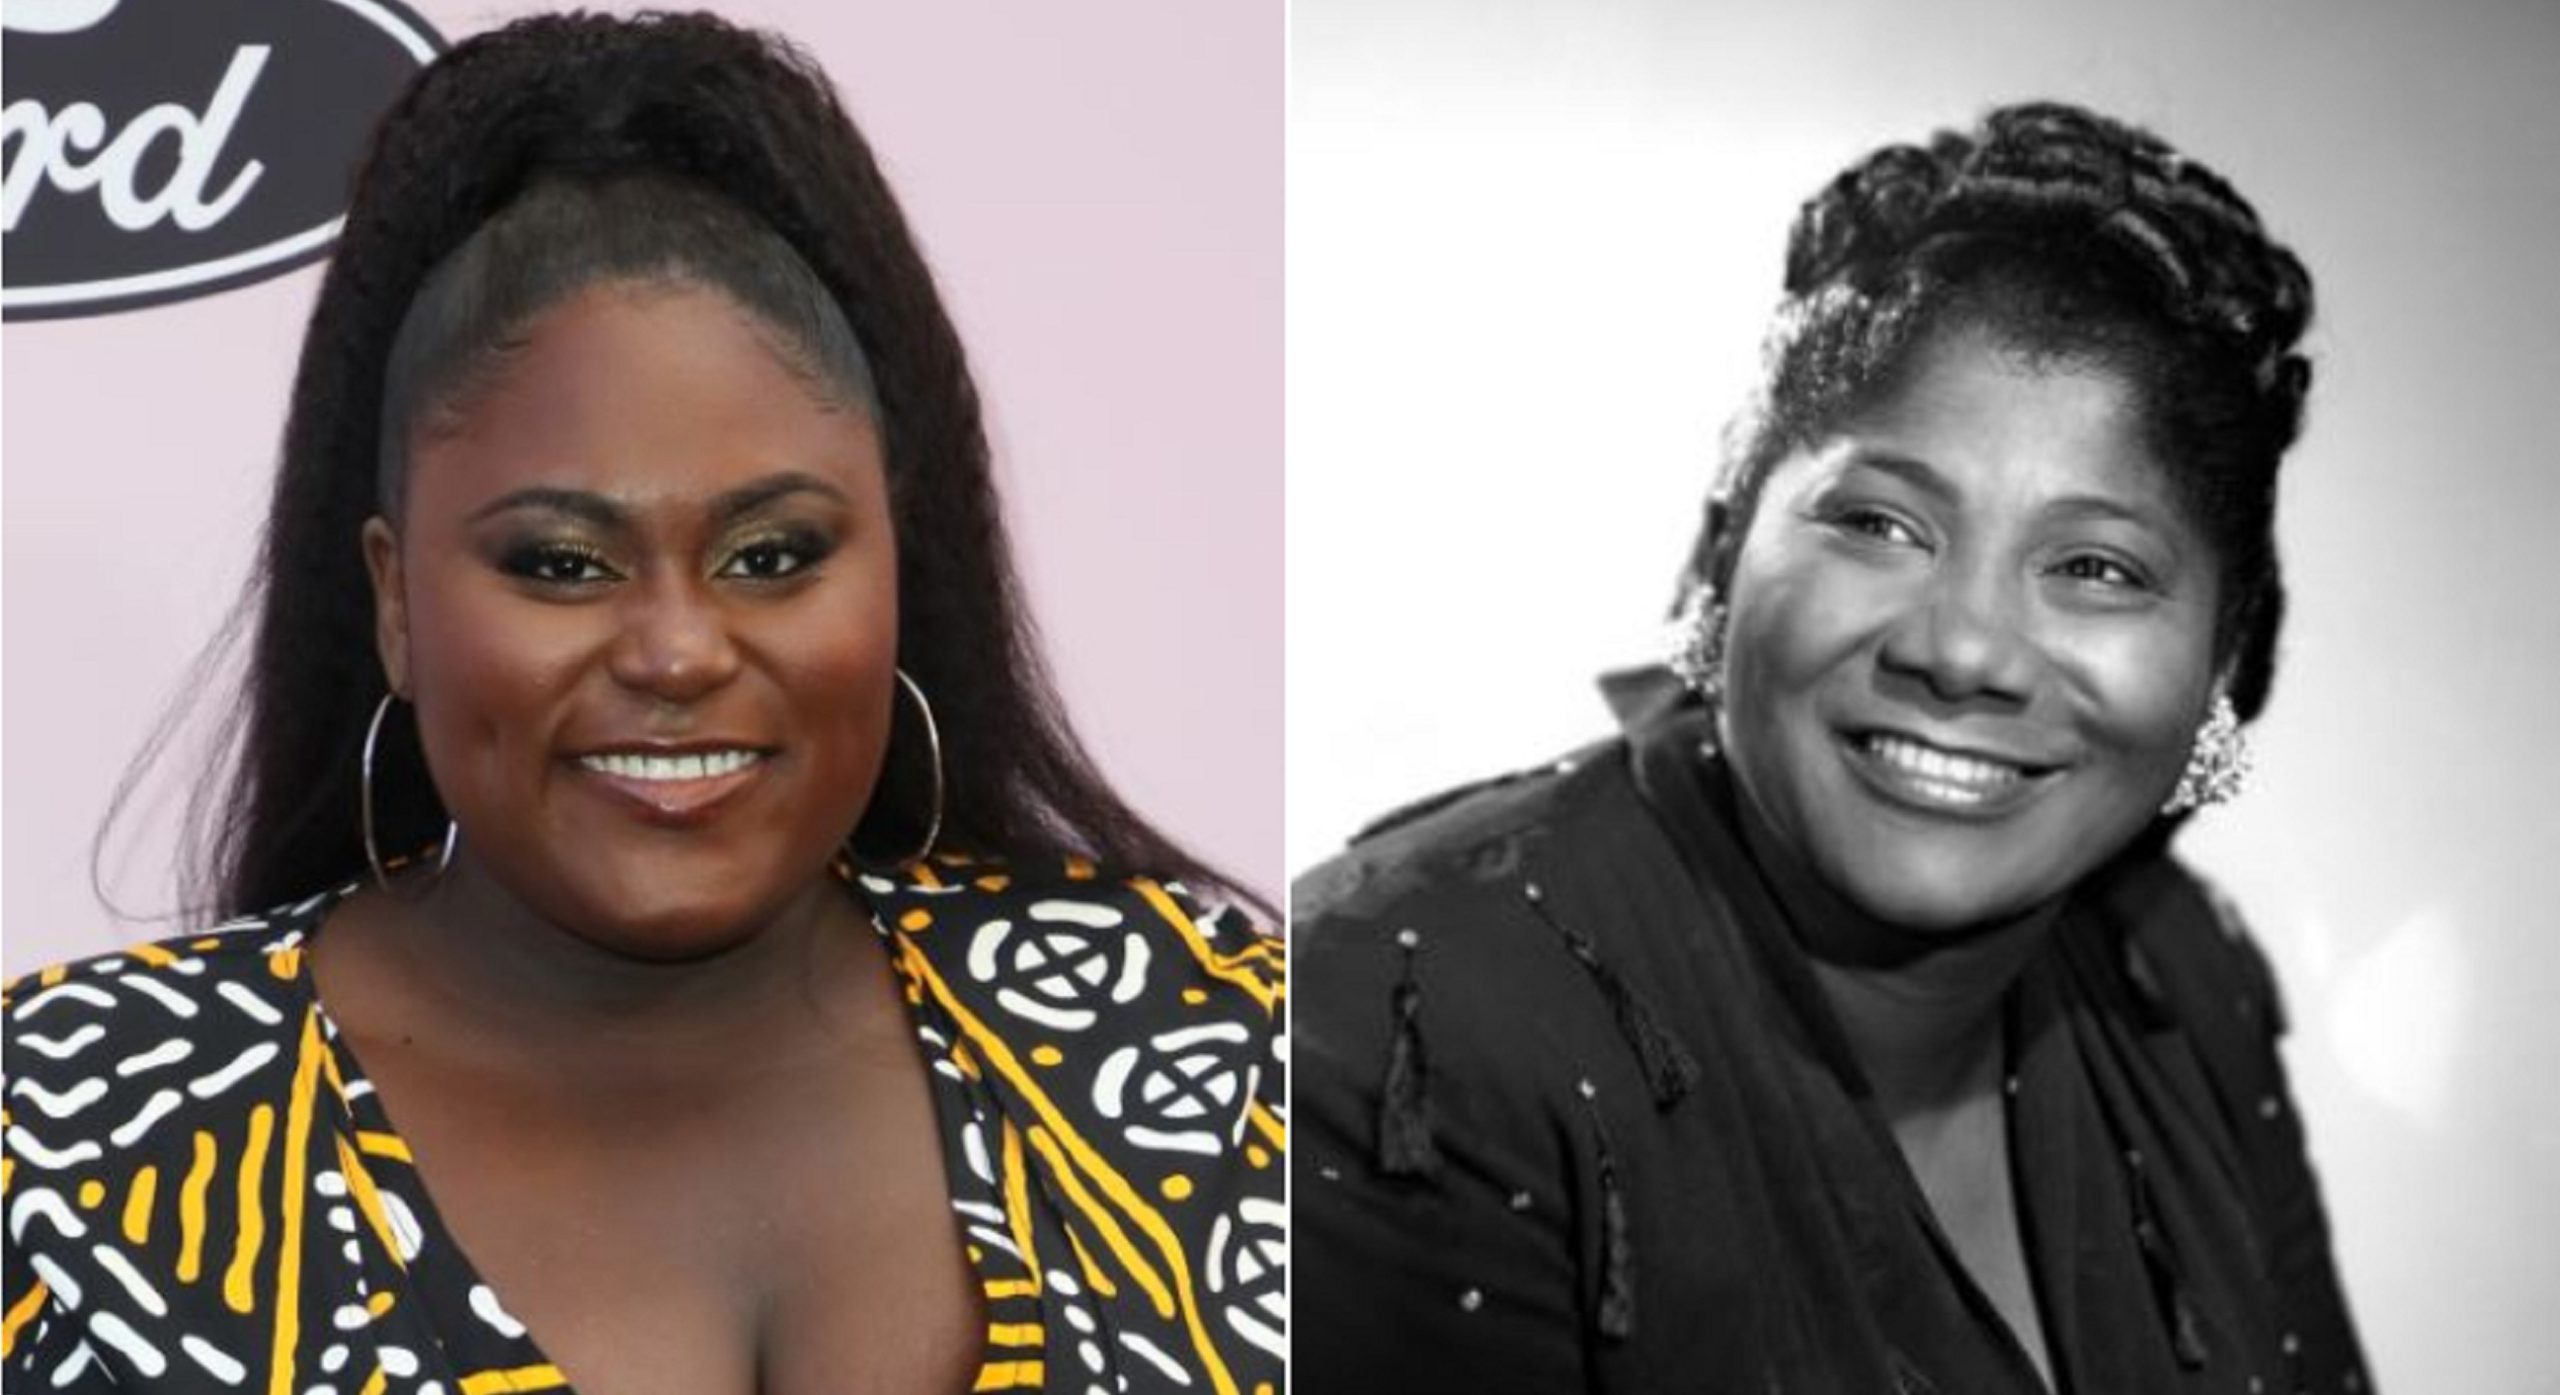 Mahalia Jackson Biopic To Be Curated By Lifetime, With Danielle Brooks in Lead